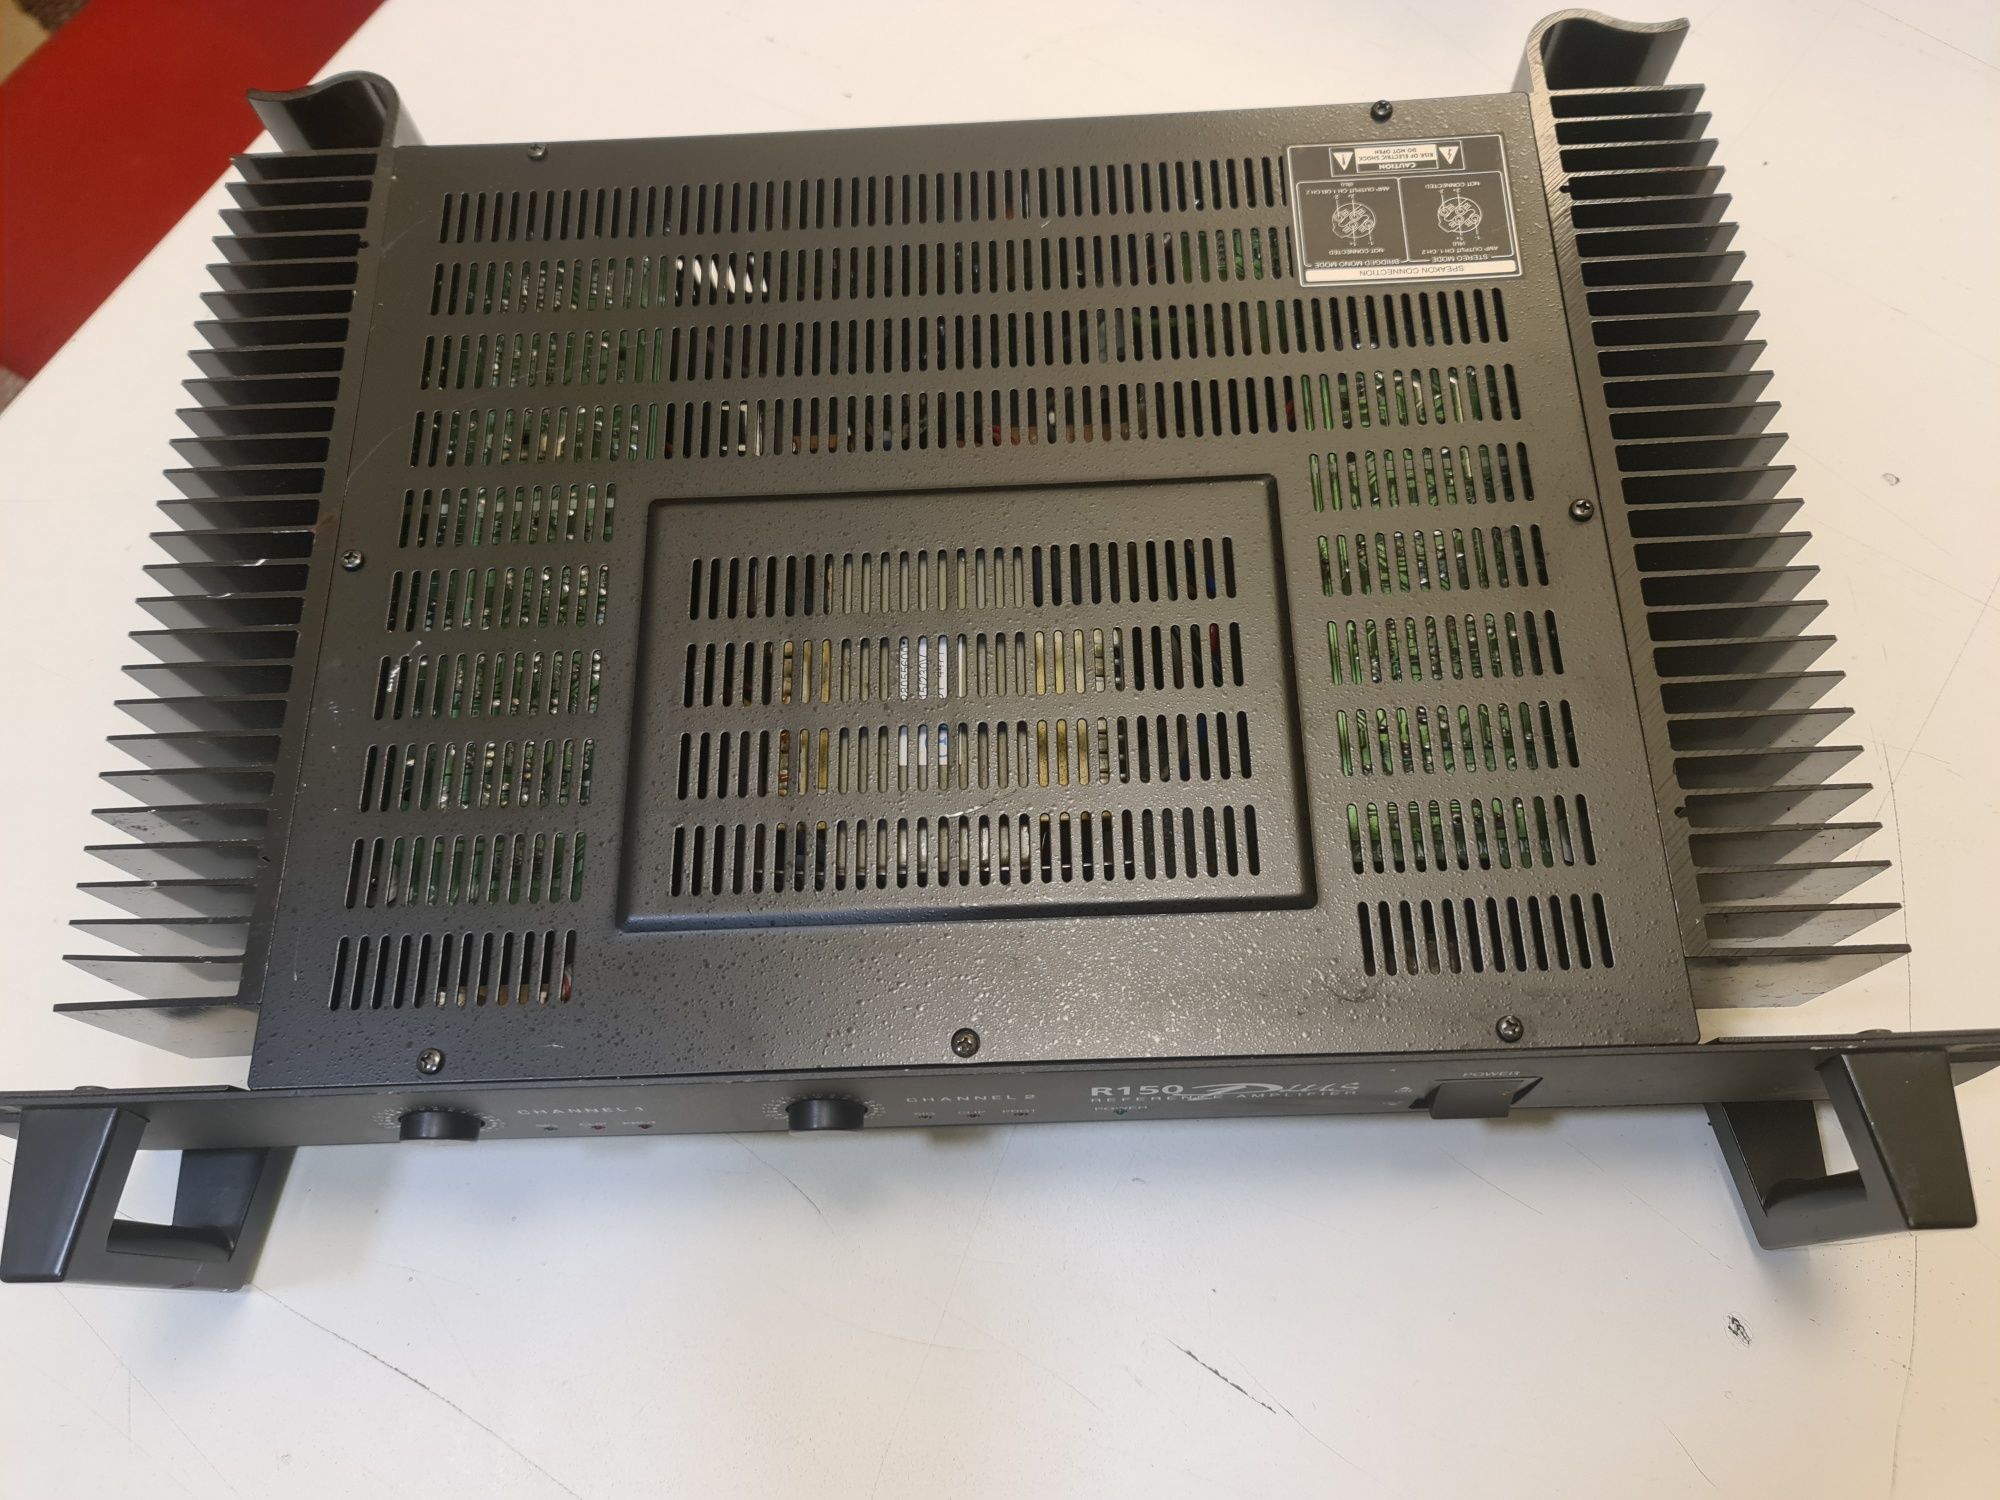 Inter M r150 plus reference amplifier